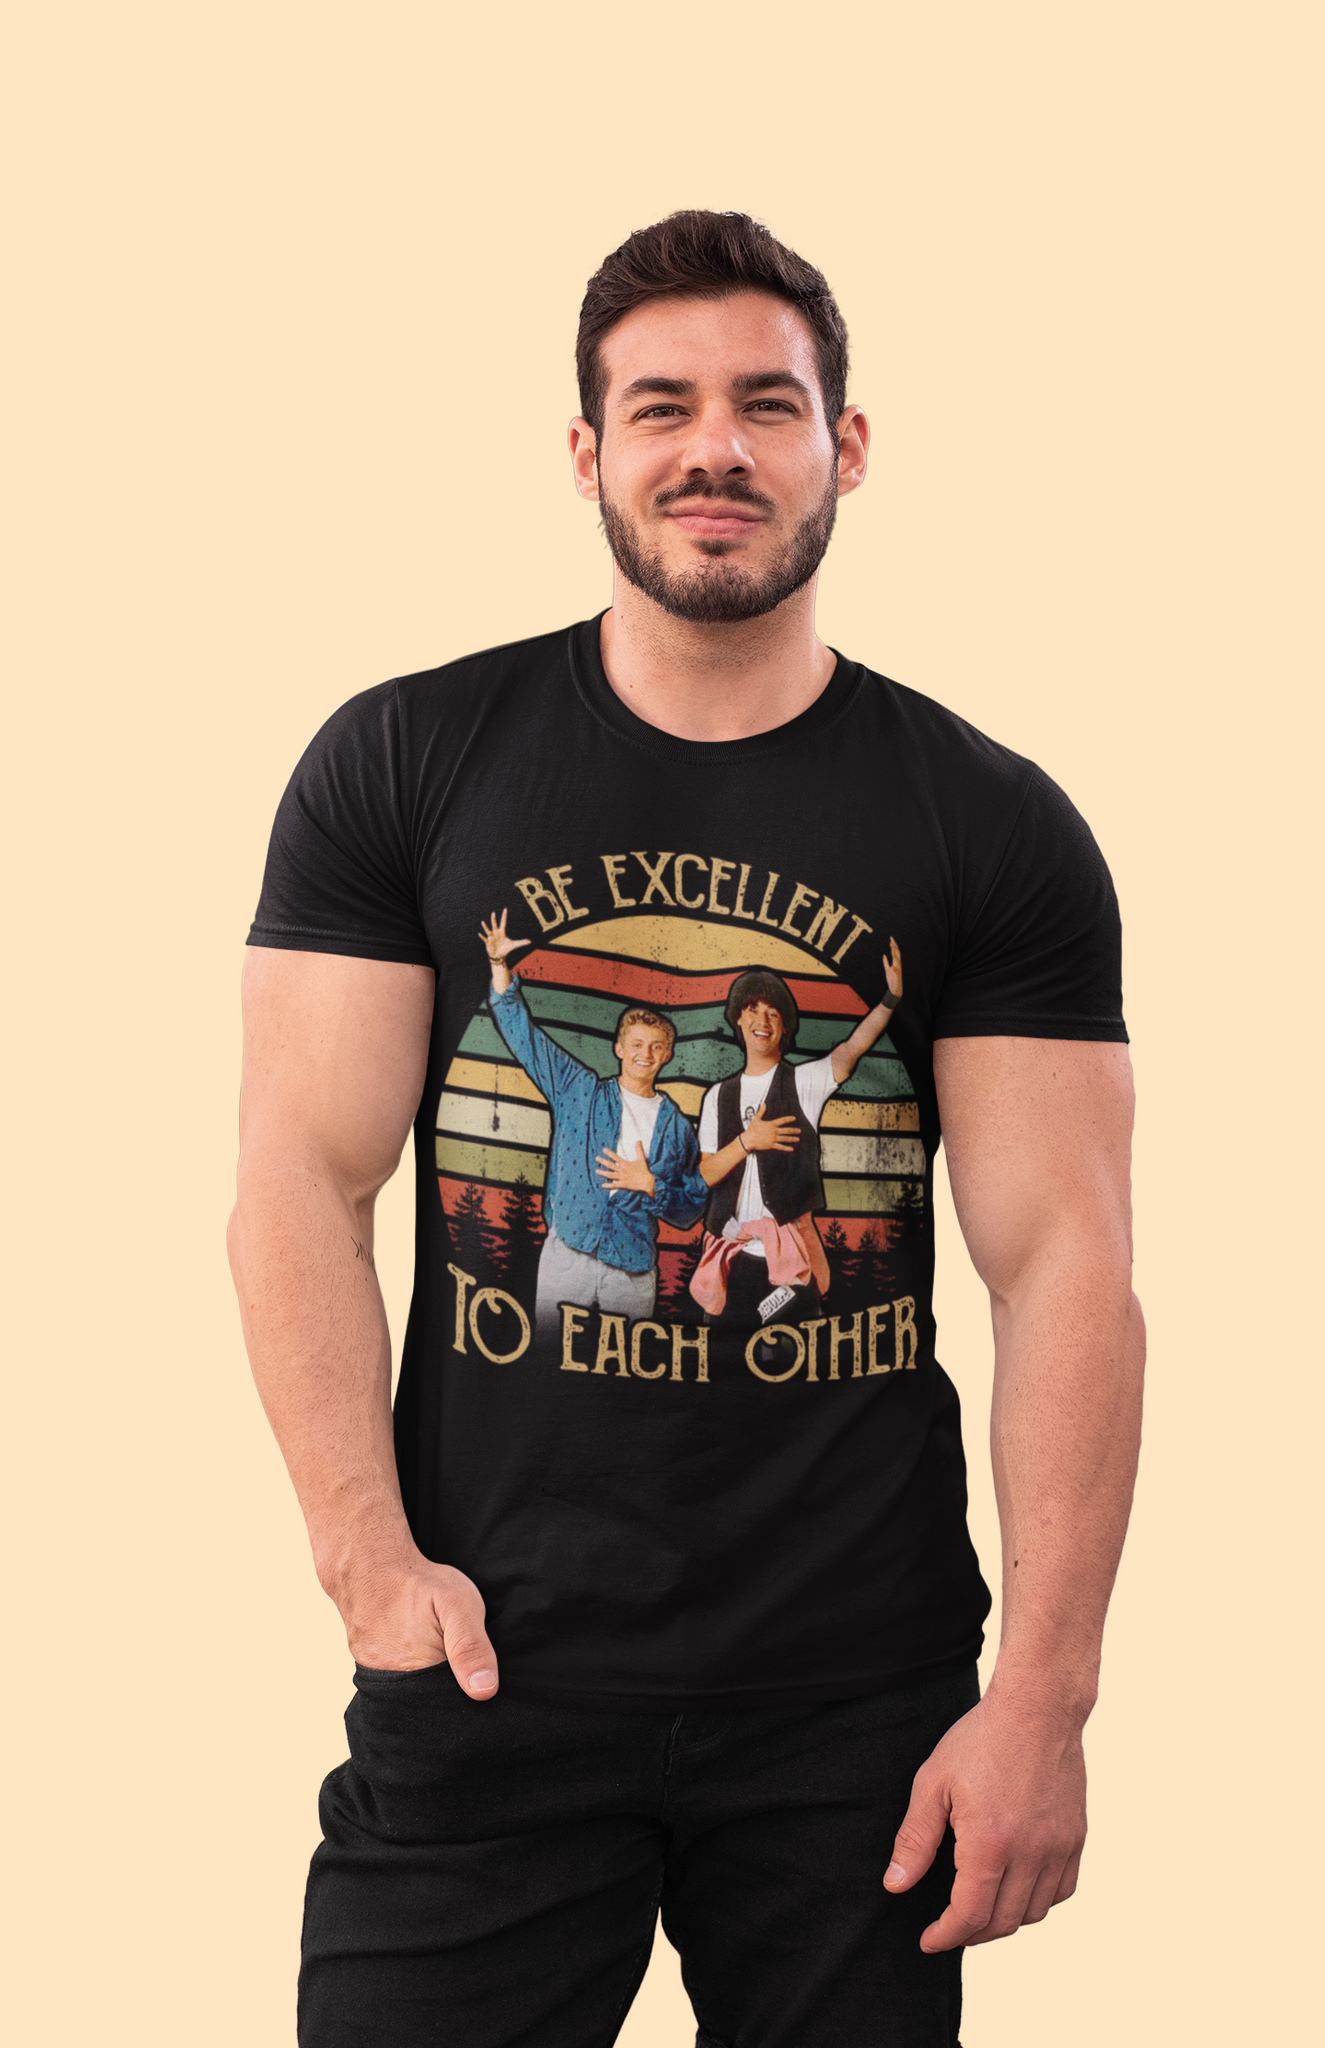 Bill And Teds Excellent Adventure Vintage T Shirt, Bill Ted T Shirt, Be Excellent To Each Other Shirt